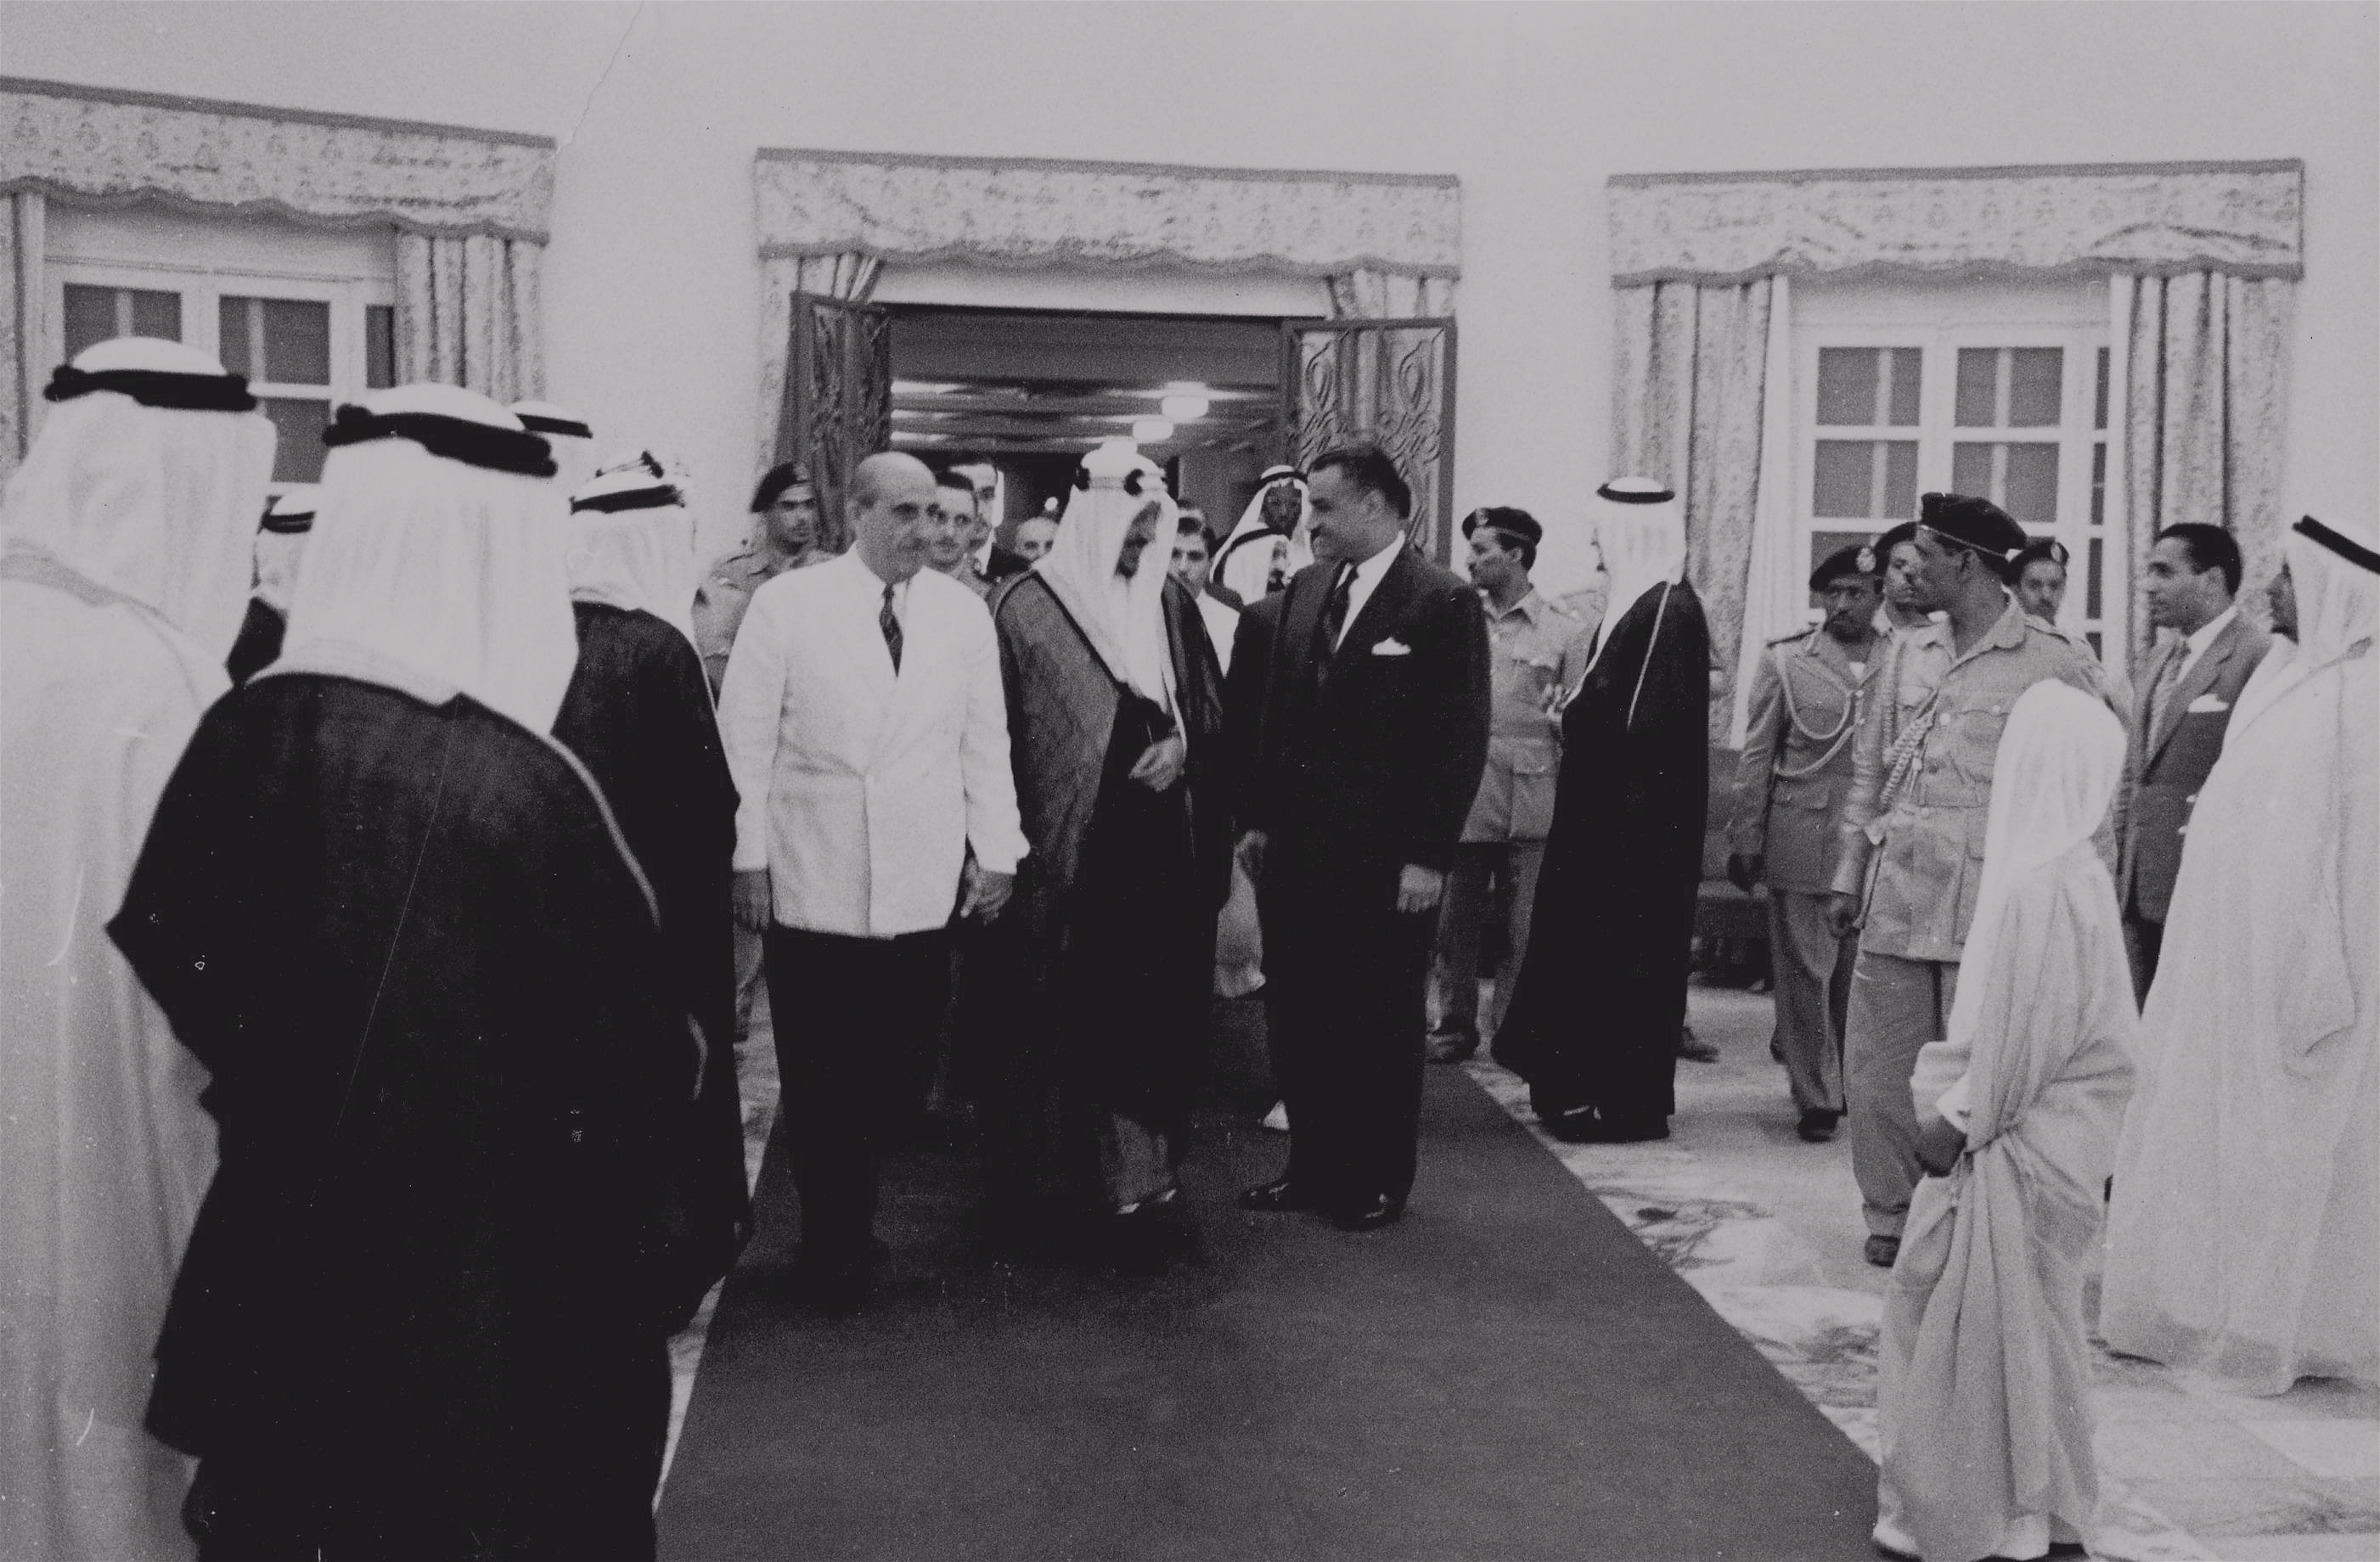 King Saud with President Jamal Abdulnasser of Egypt and President Shukri Al-Qotli of Syria in the Red Palace during their visit to The Kingdom in 1955